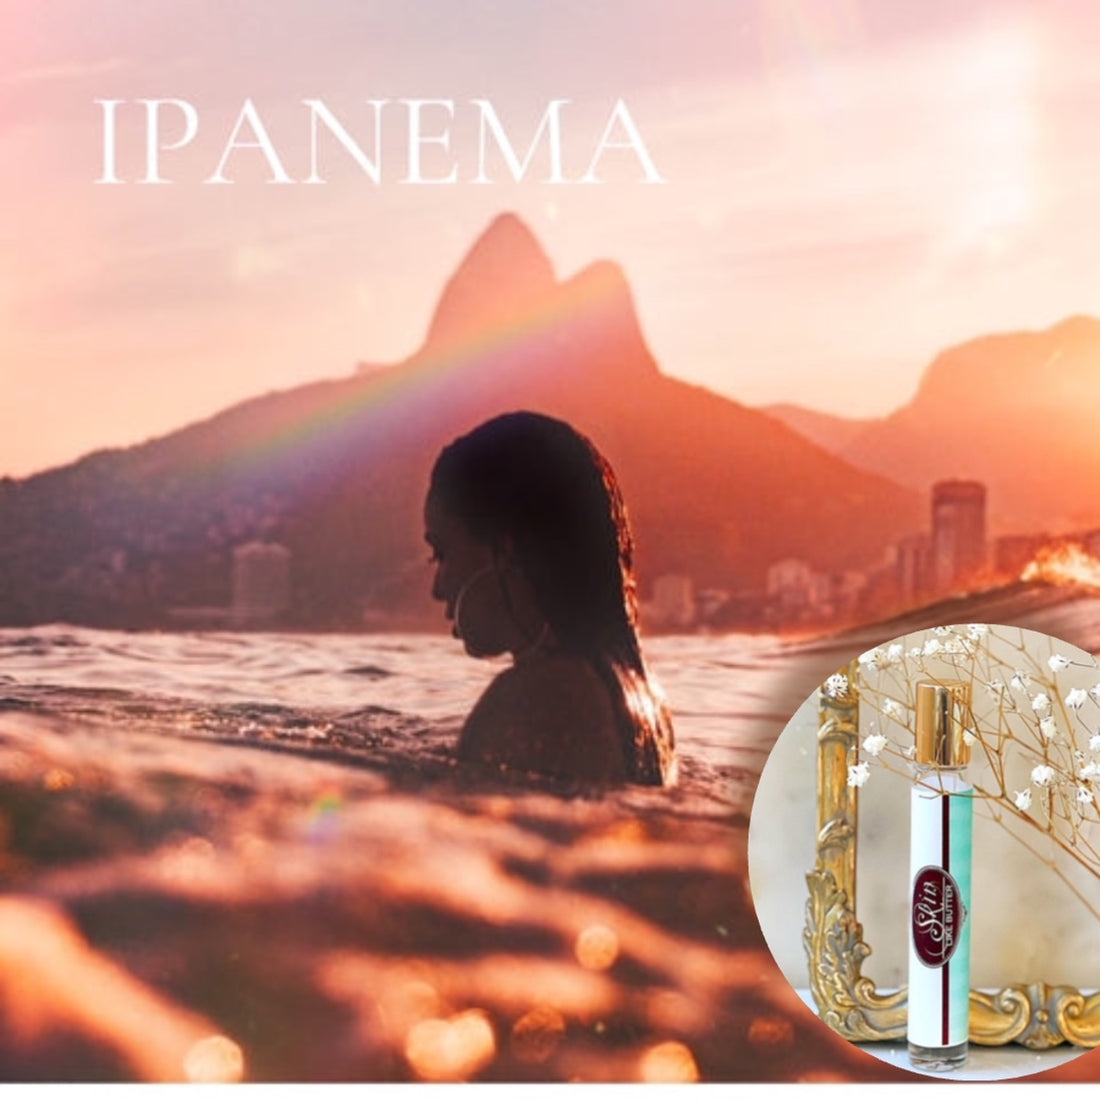 IPANEMA Roll on Perfume Sale! ~ Buy 1 get 1 50% off-use coupon code 2PLEASE